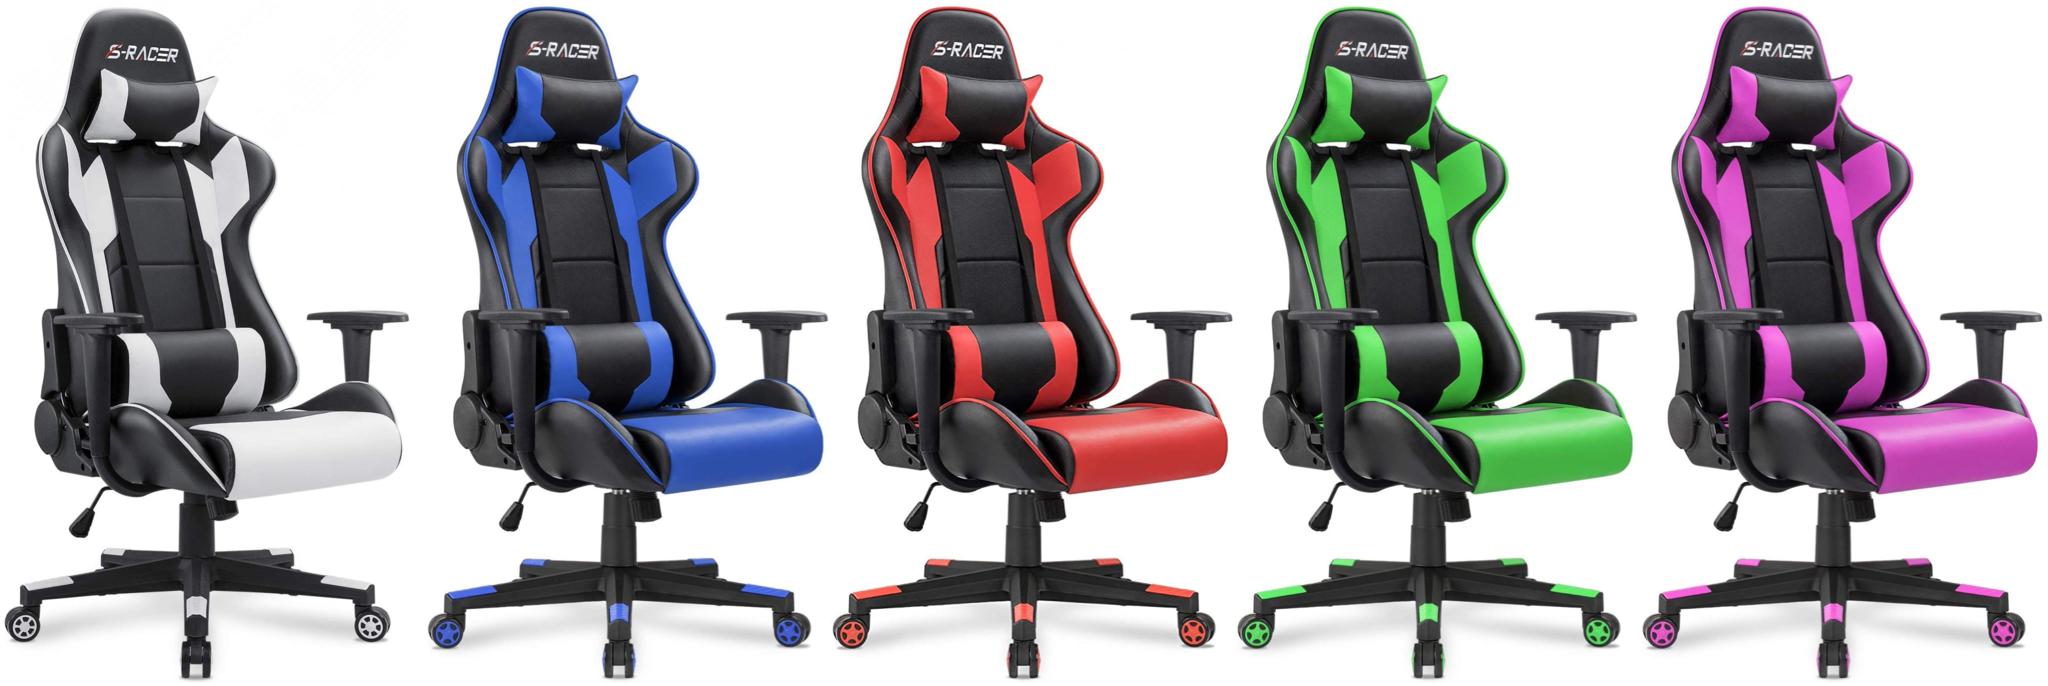 Homall Gaming Chair Colors